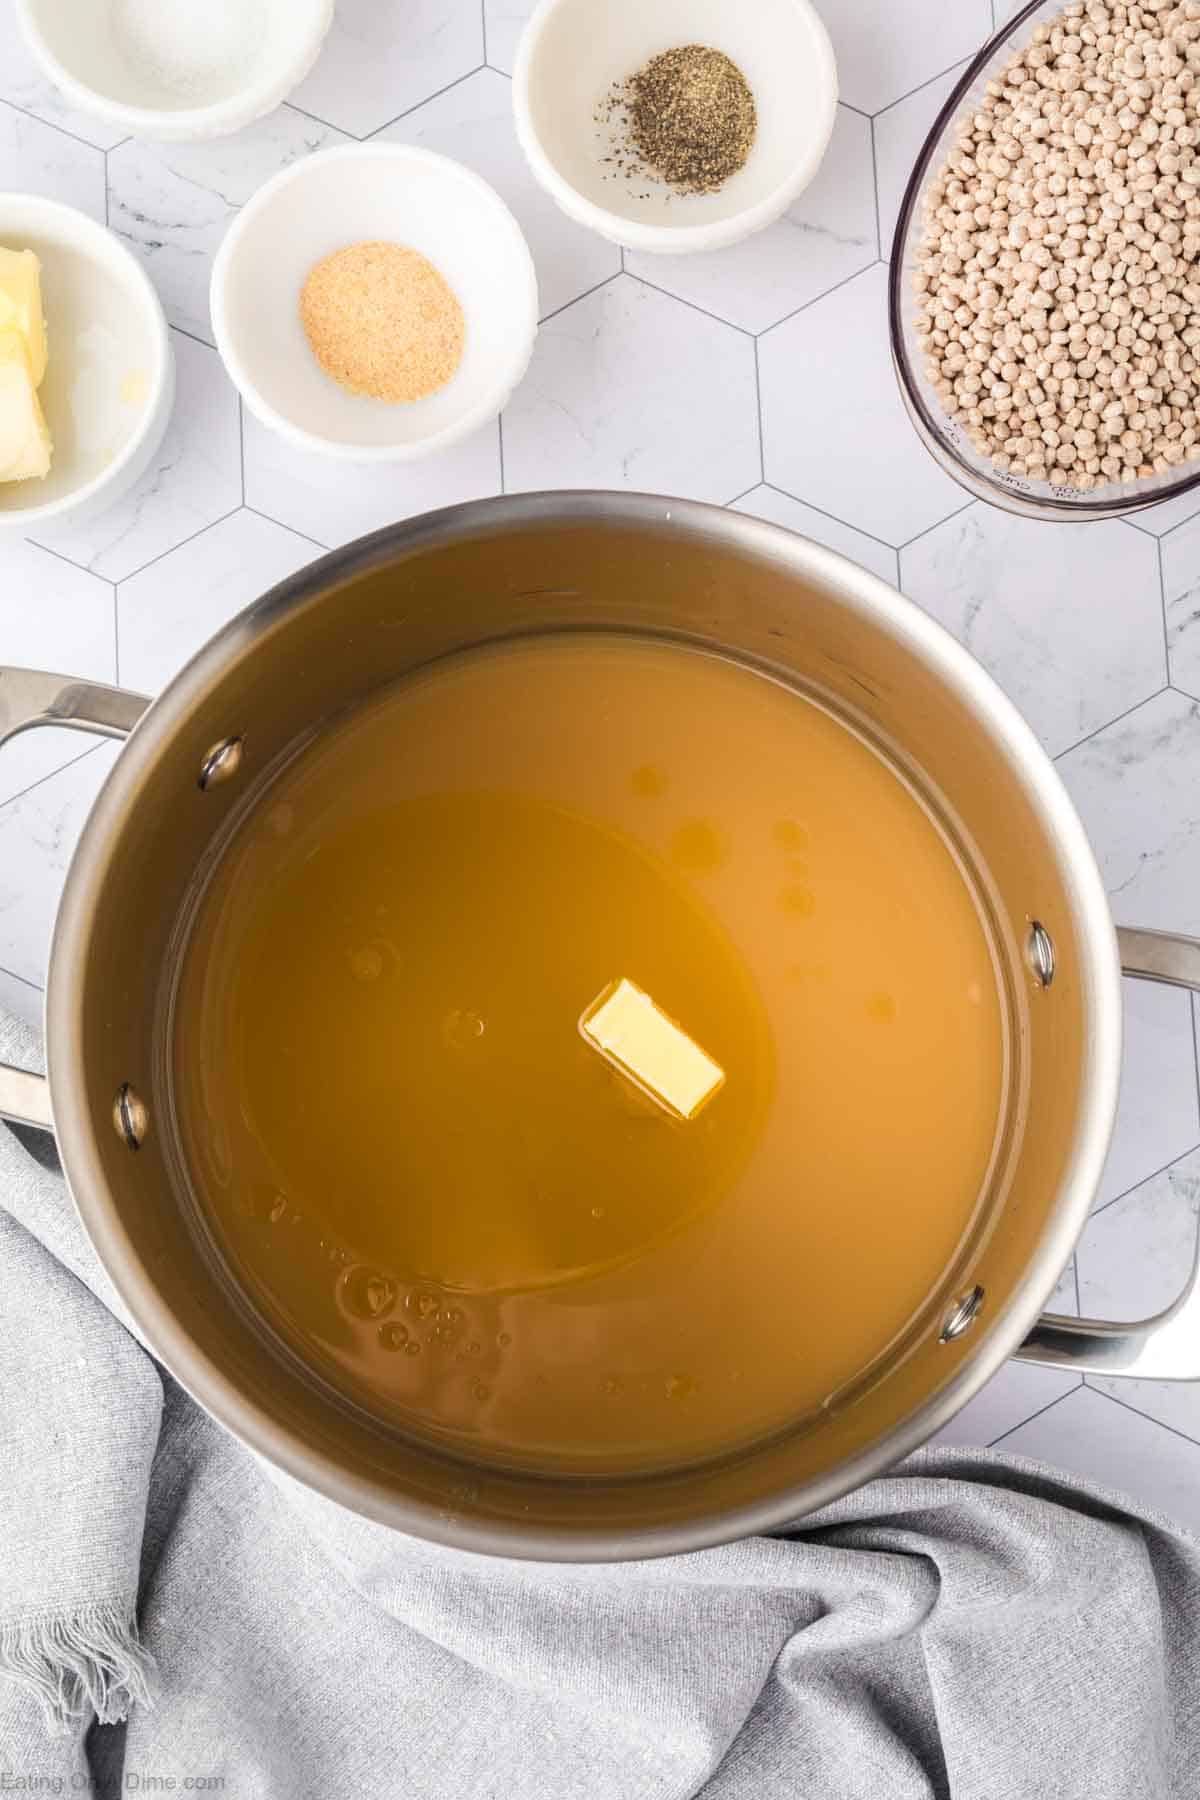 Adding the butter, broth, oil and seasoning to a large pot